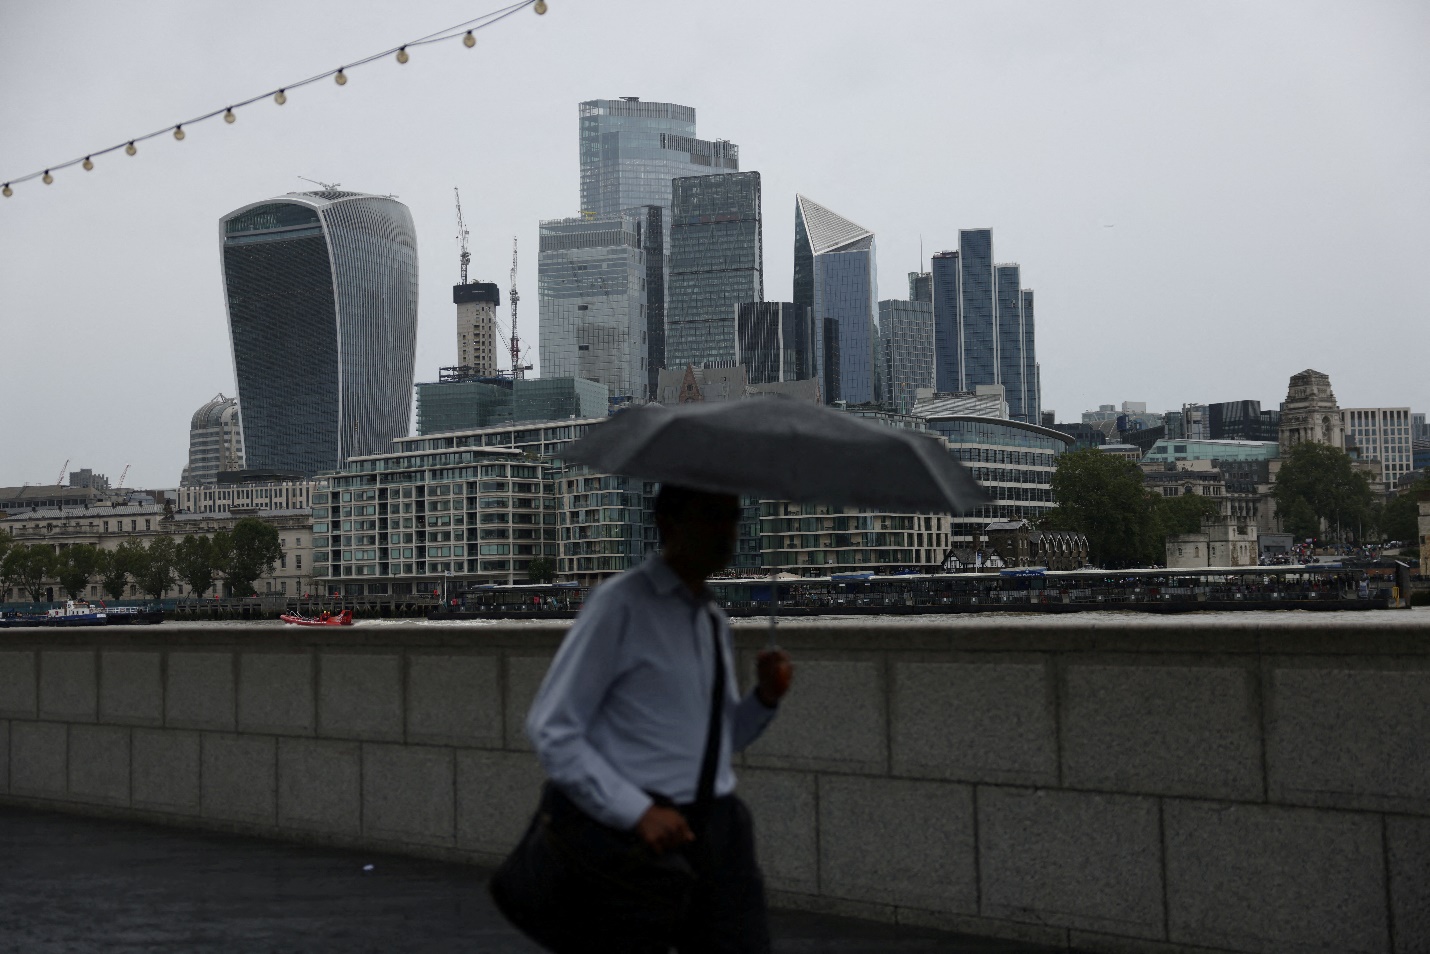 A pedestrian carrying an umbrella walks along the River Thames in view of City of London skyline in London